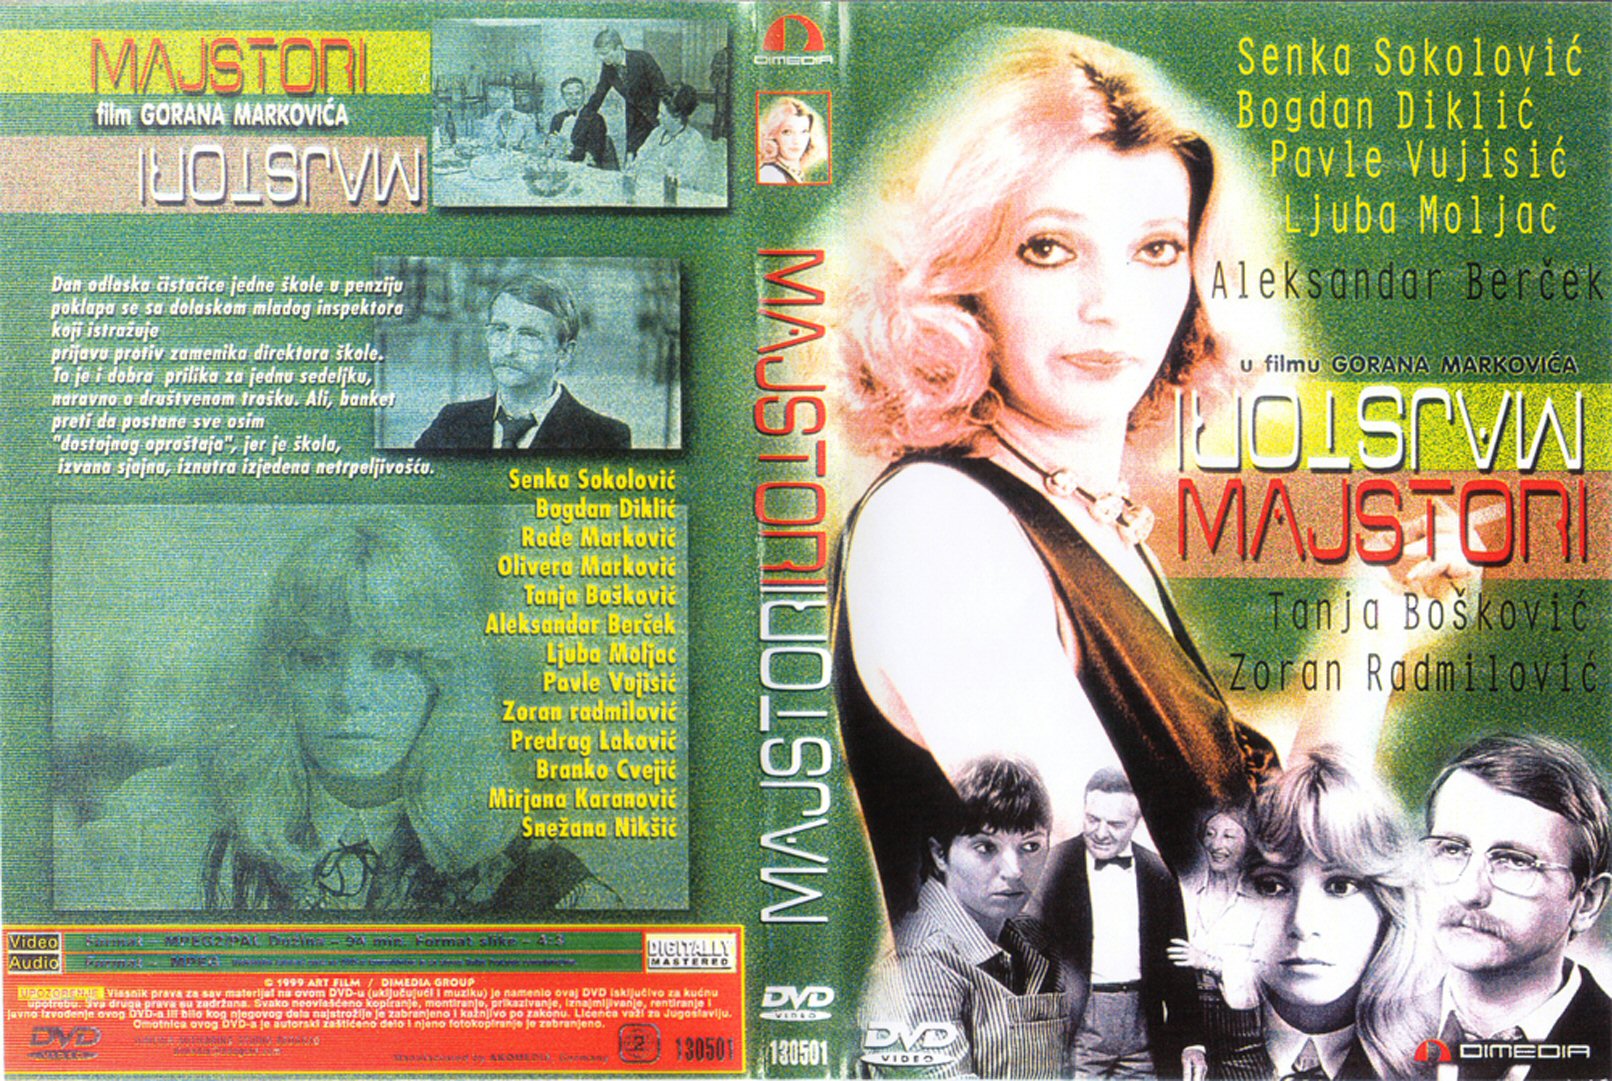 Click to view full size image -  DVD Cover - 0-9 - majstori_majstori_dvd - majstori_majstori_dvd.jpg